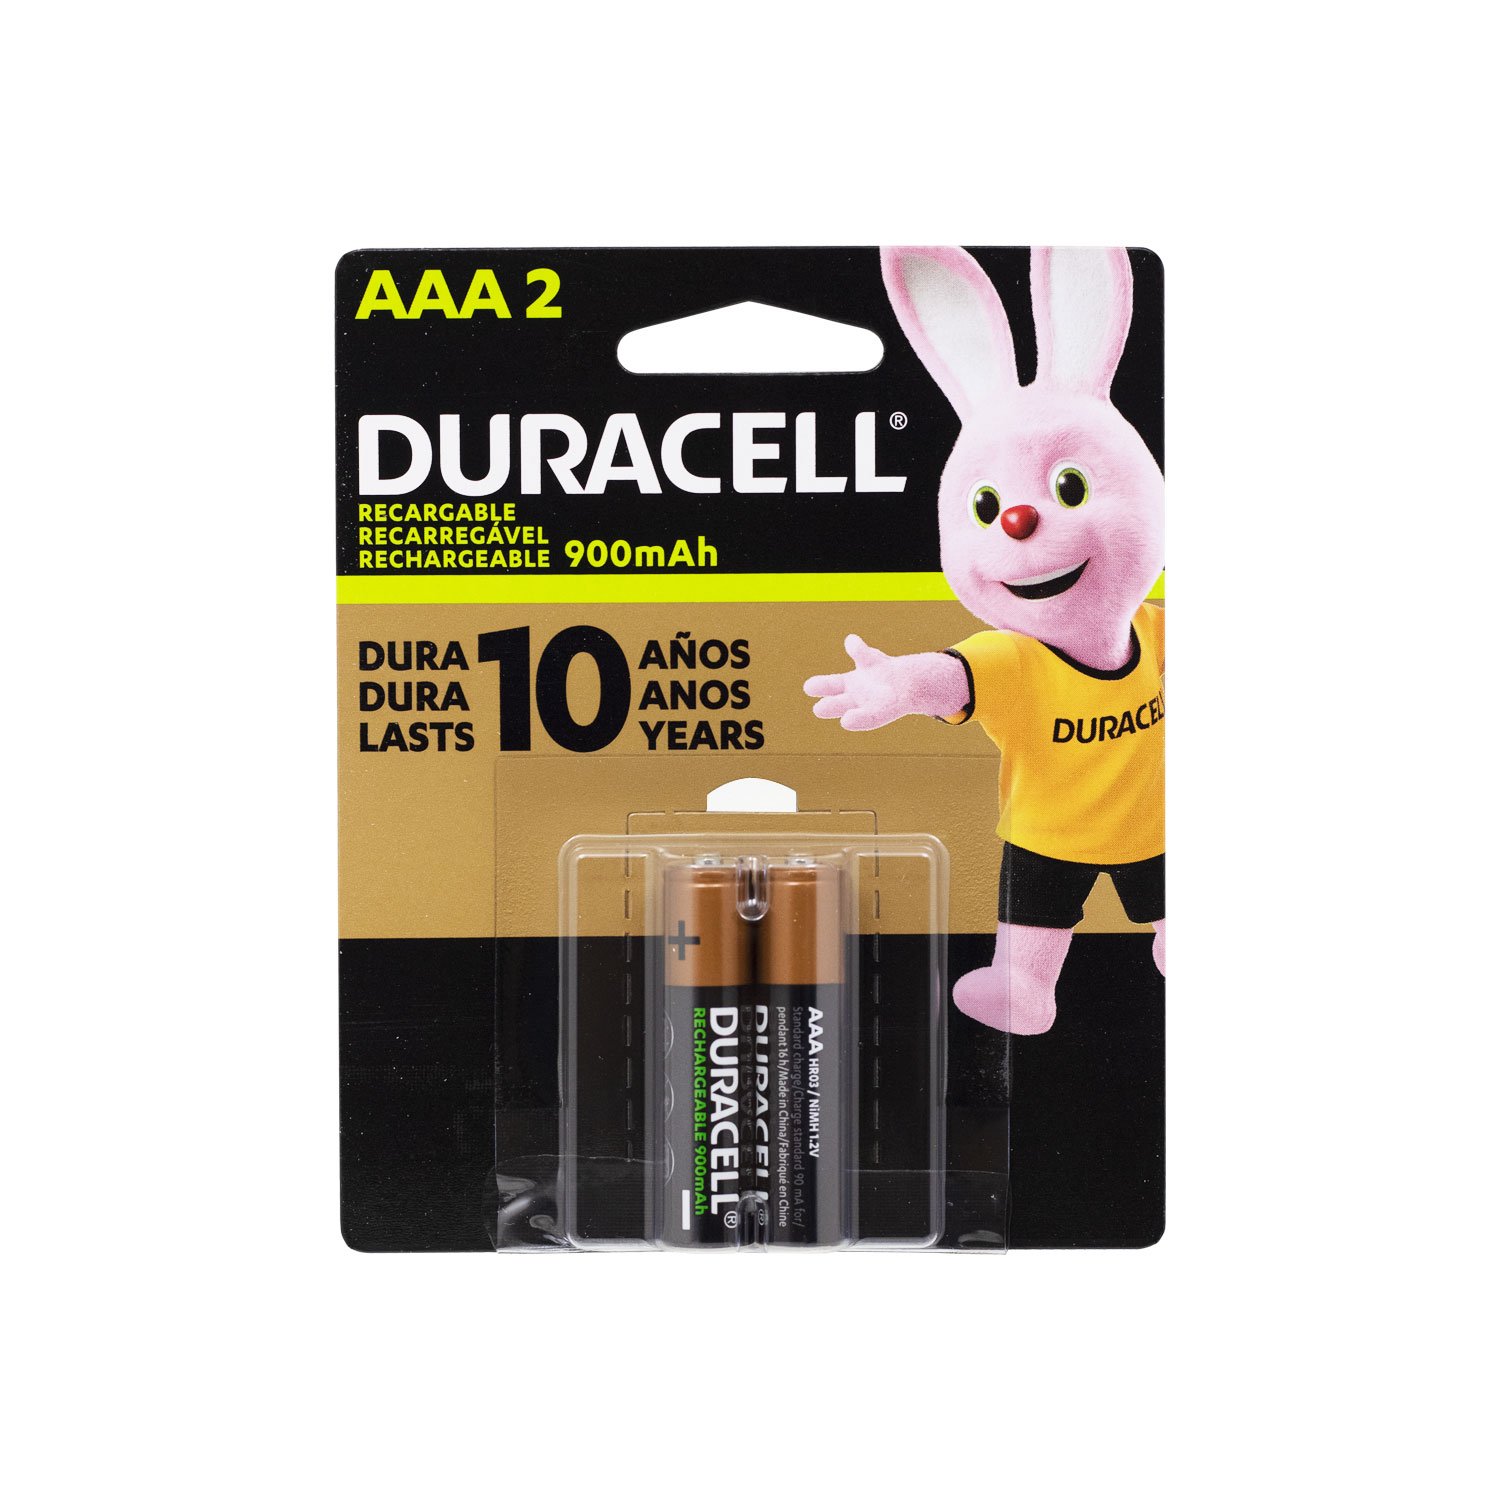 Bateria Duracell Aaa - Uelectronica